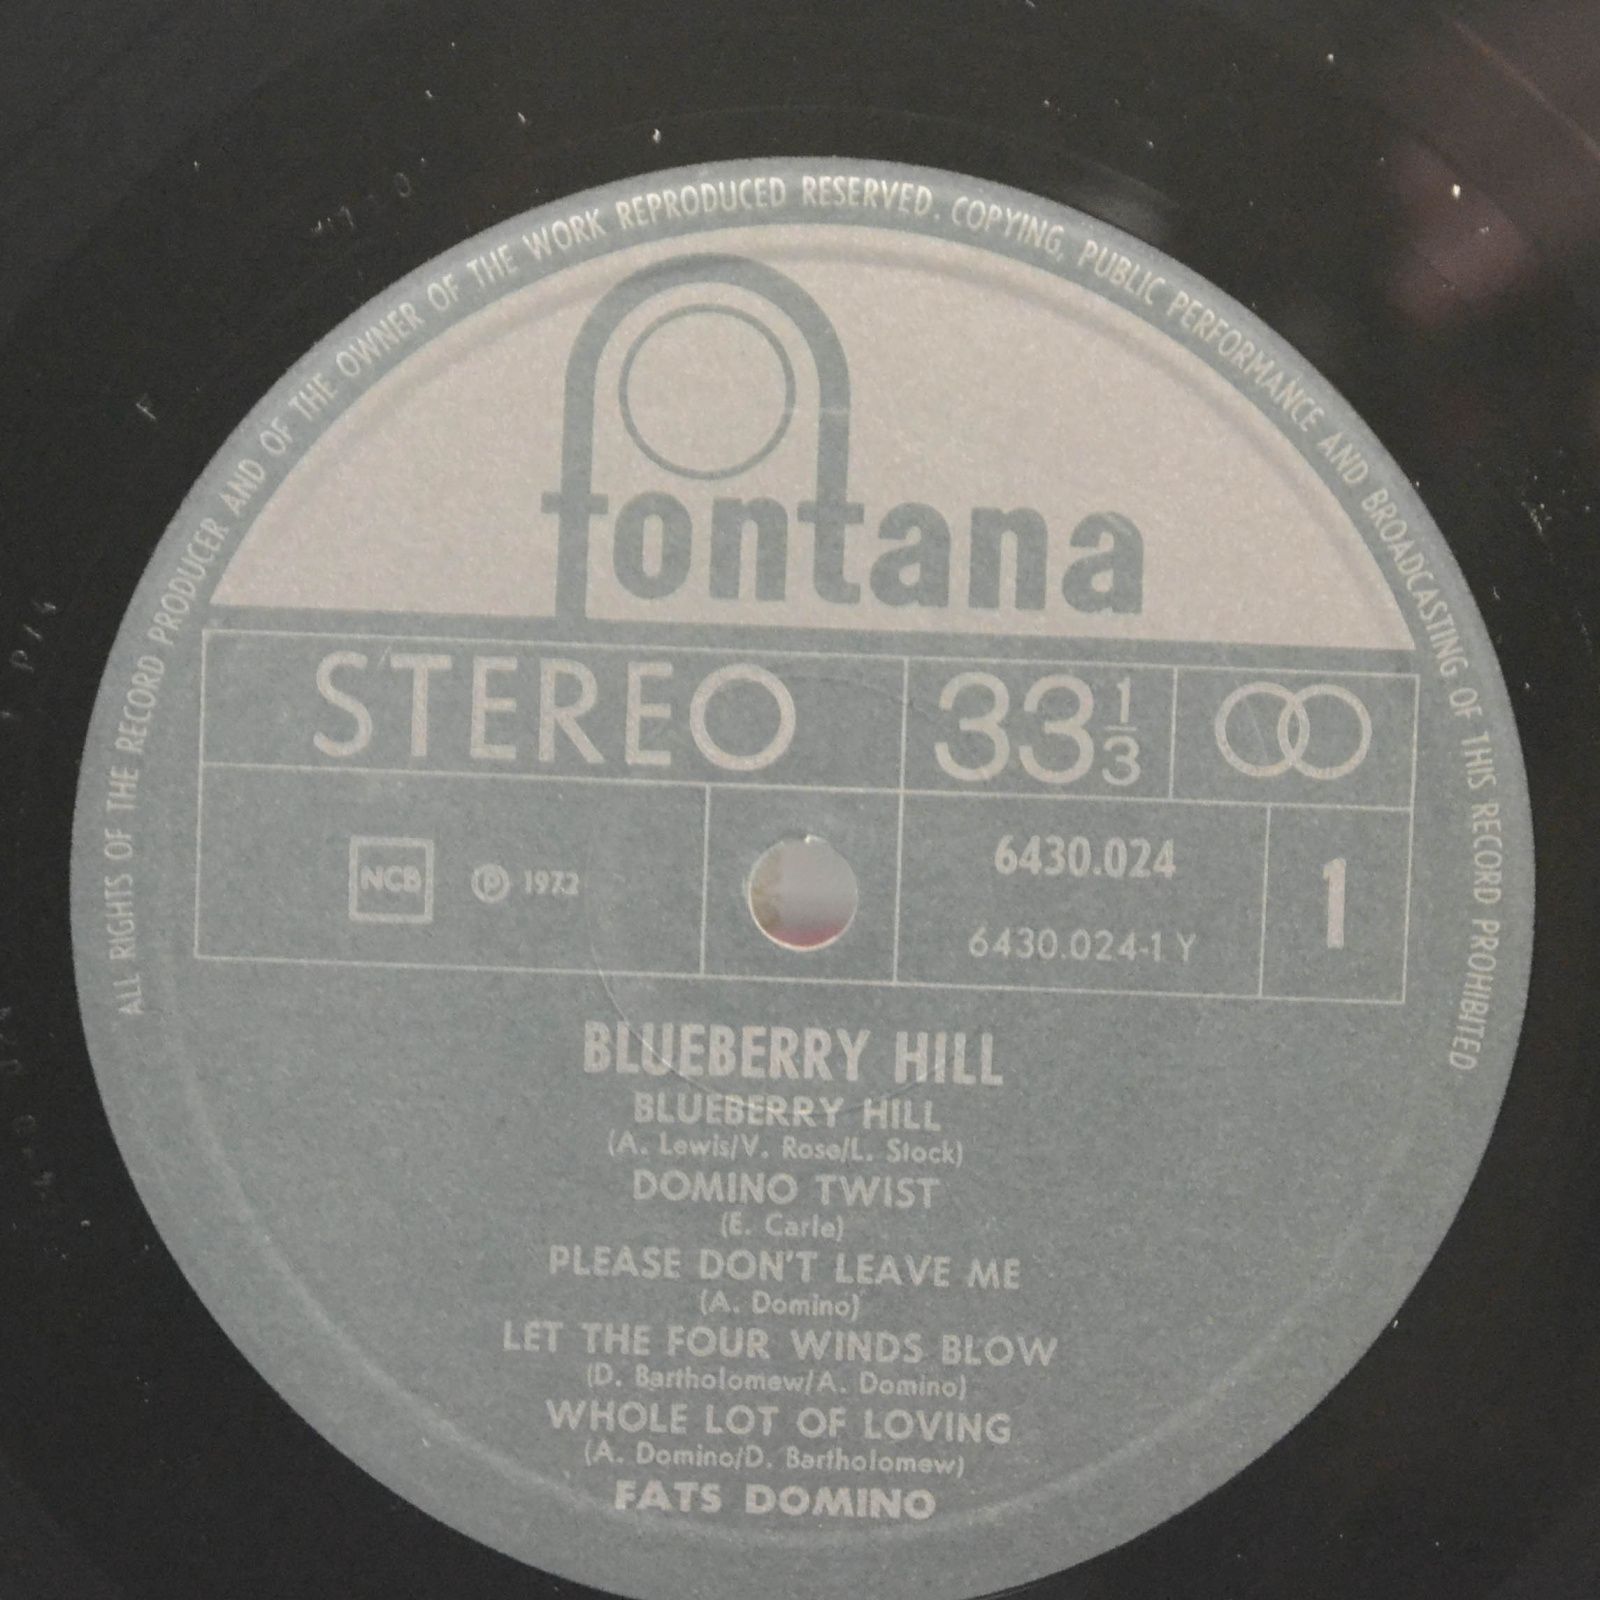 Fats Domino — Blueberry Hill, 1972